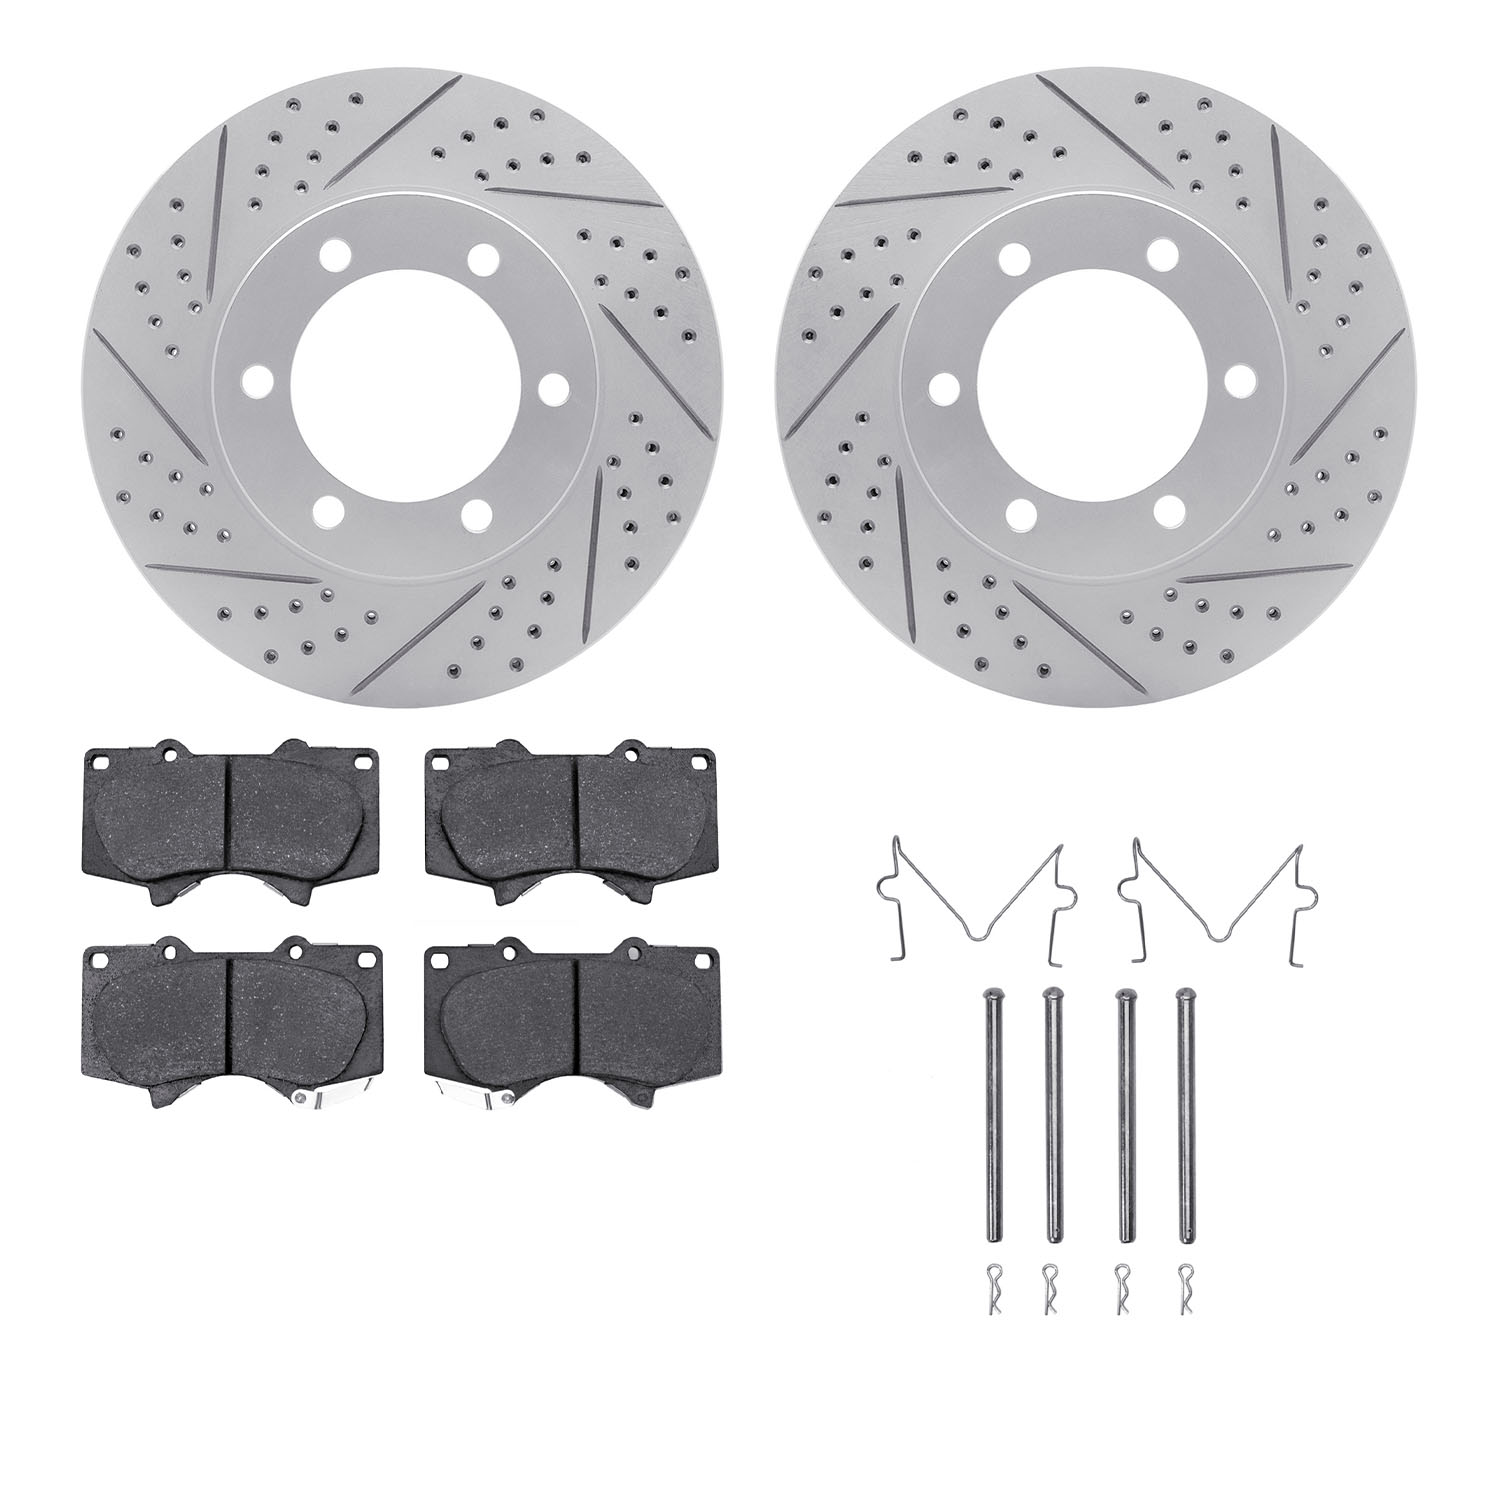 2212-76002 Geoperformance Drilled/Slotted Rotors w/Heavy-Duty Pads Kit & Hardware, 2000-2007 Lexus/Toyota/Scion, Position: Front